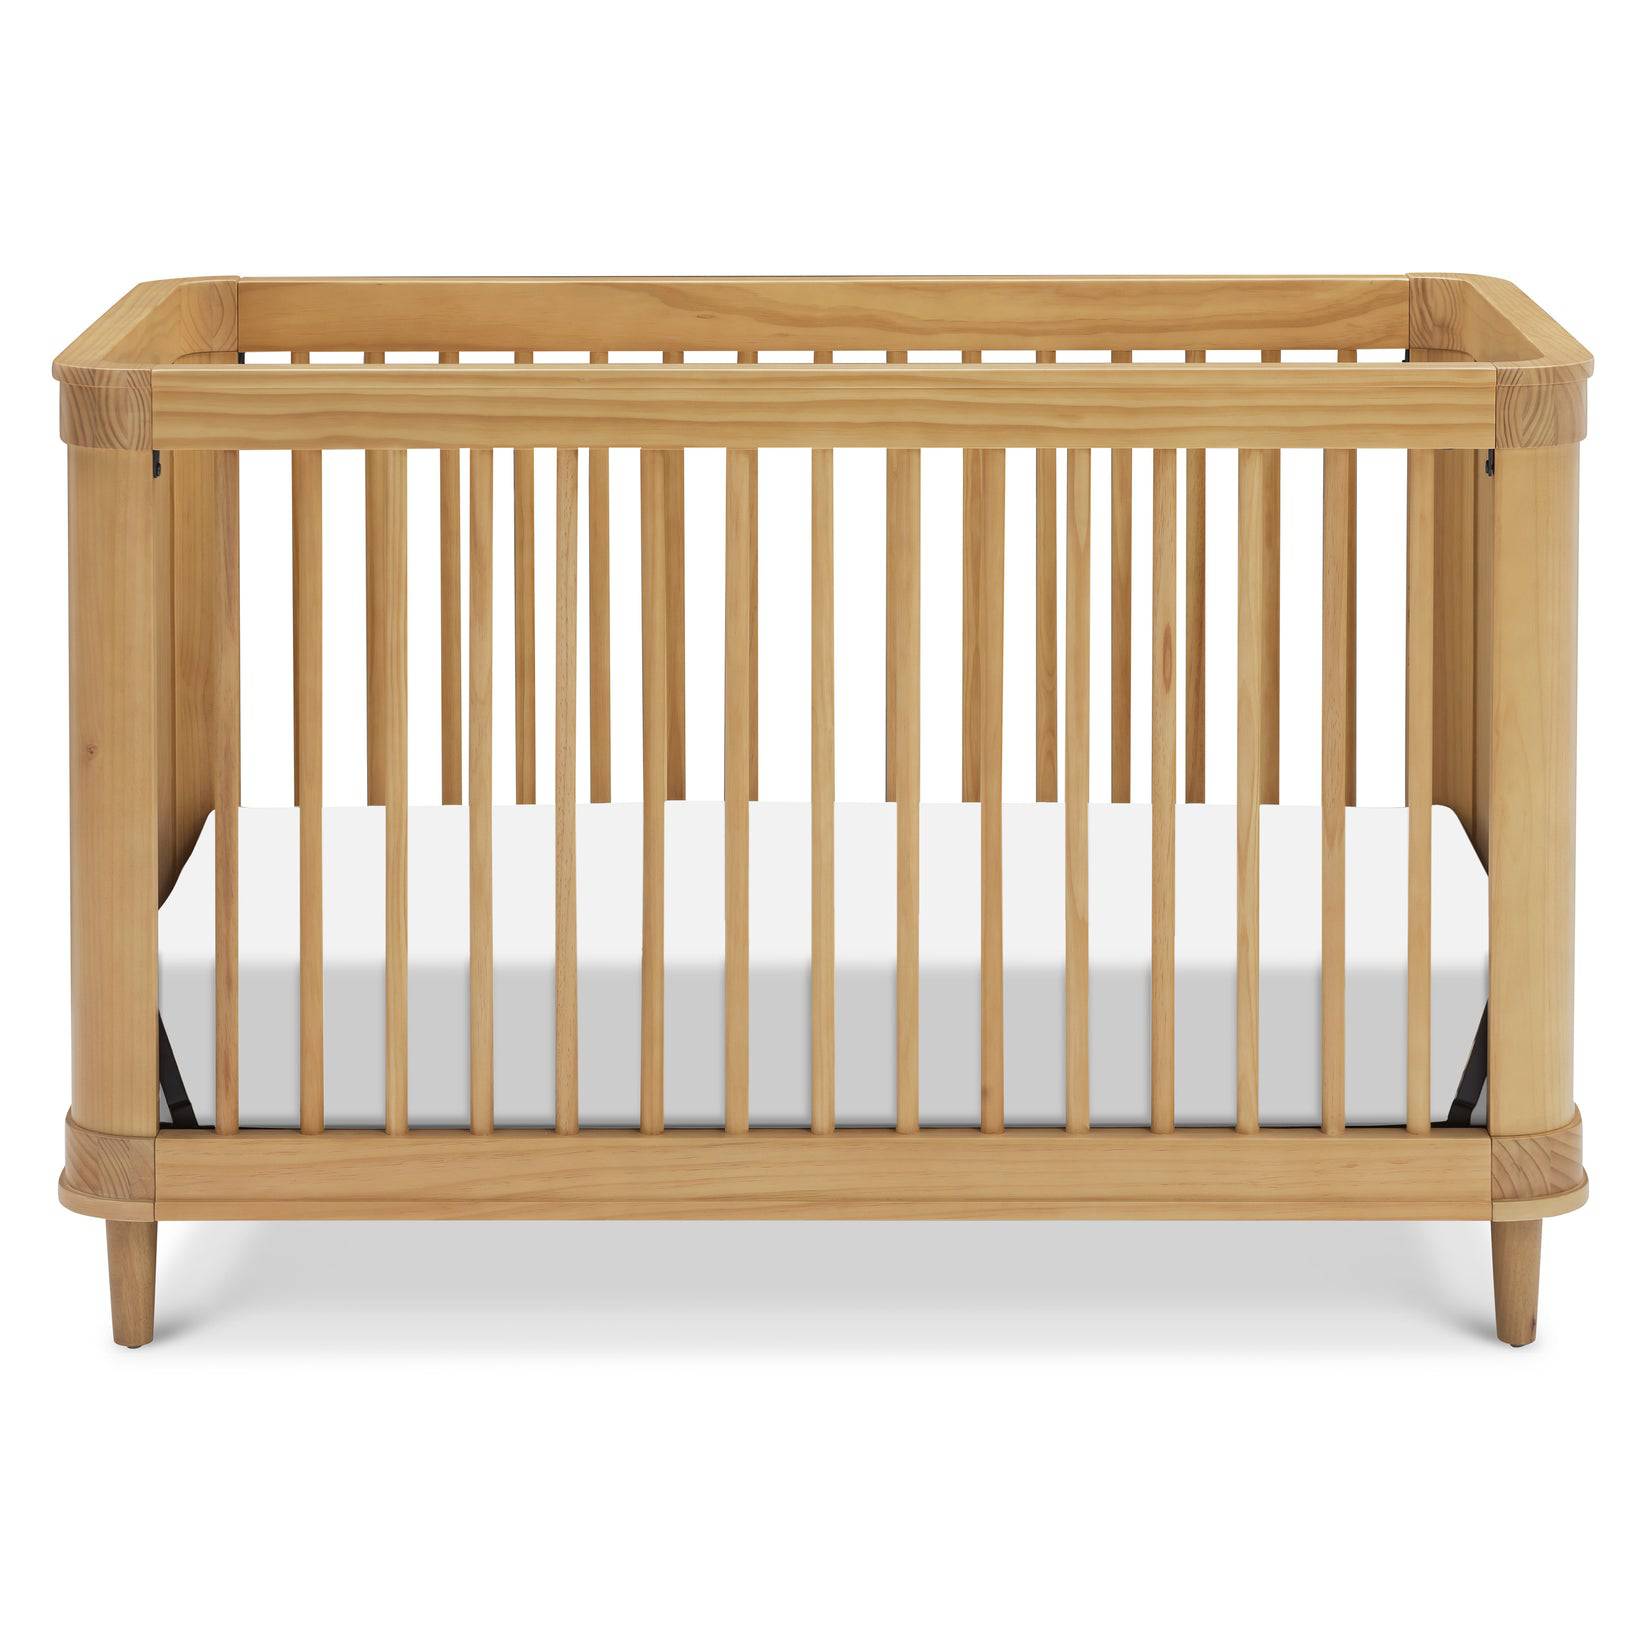 Marin with Cane 3-in-1 Convertible Crib - Twinkle Twinkle Little One